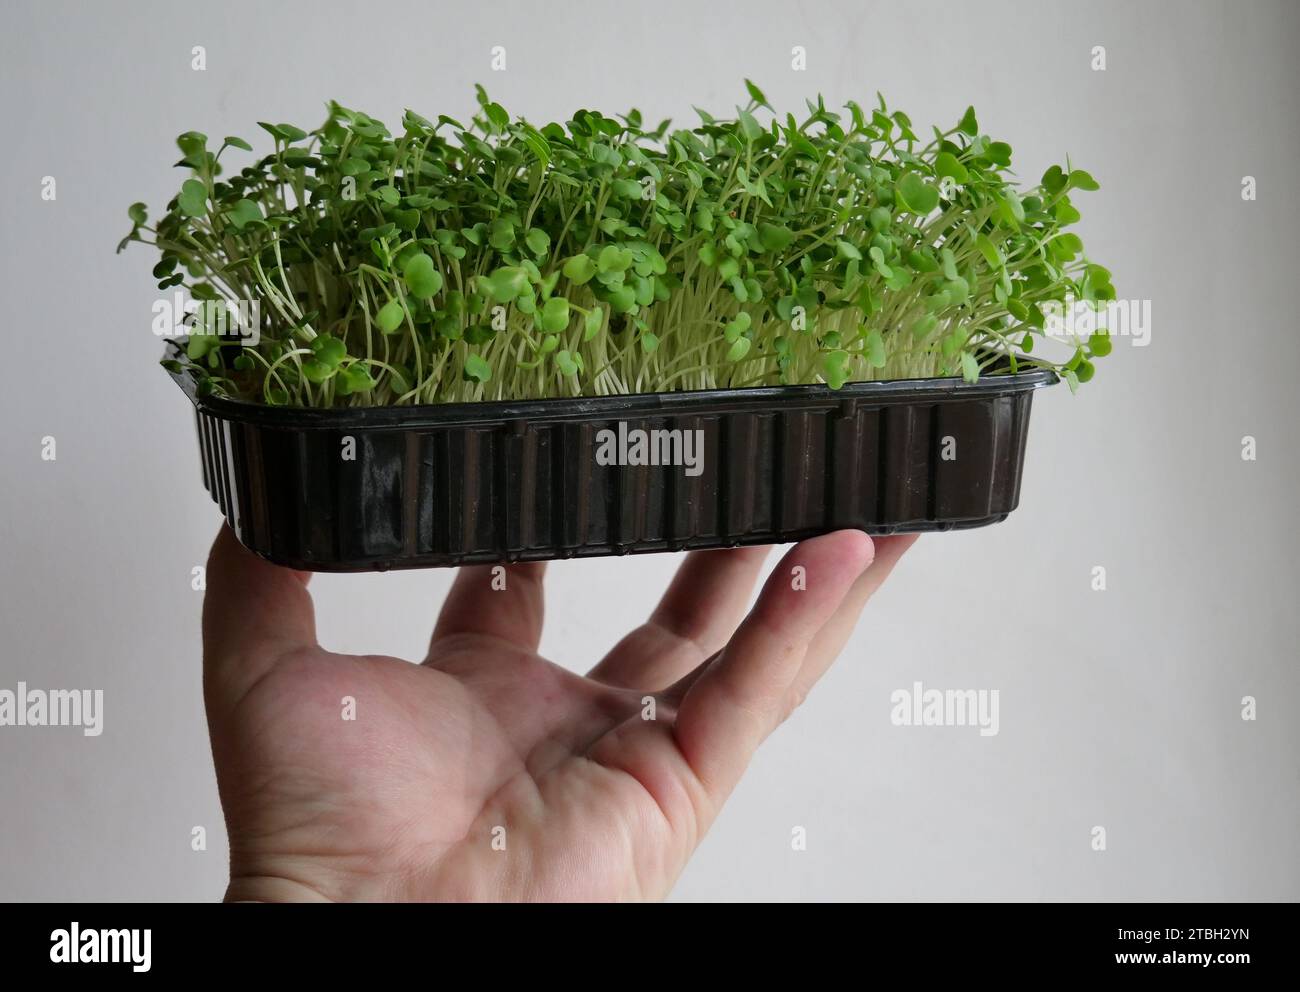 A man's hand holds a plastic pot of microgreen sprouts on his fingers isolated on white detailed stock photo Stock Photo